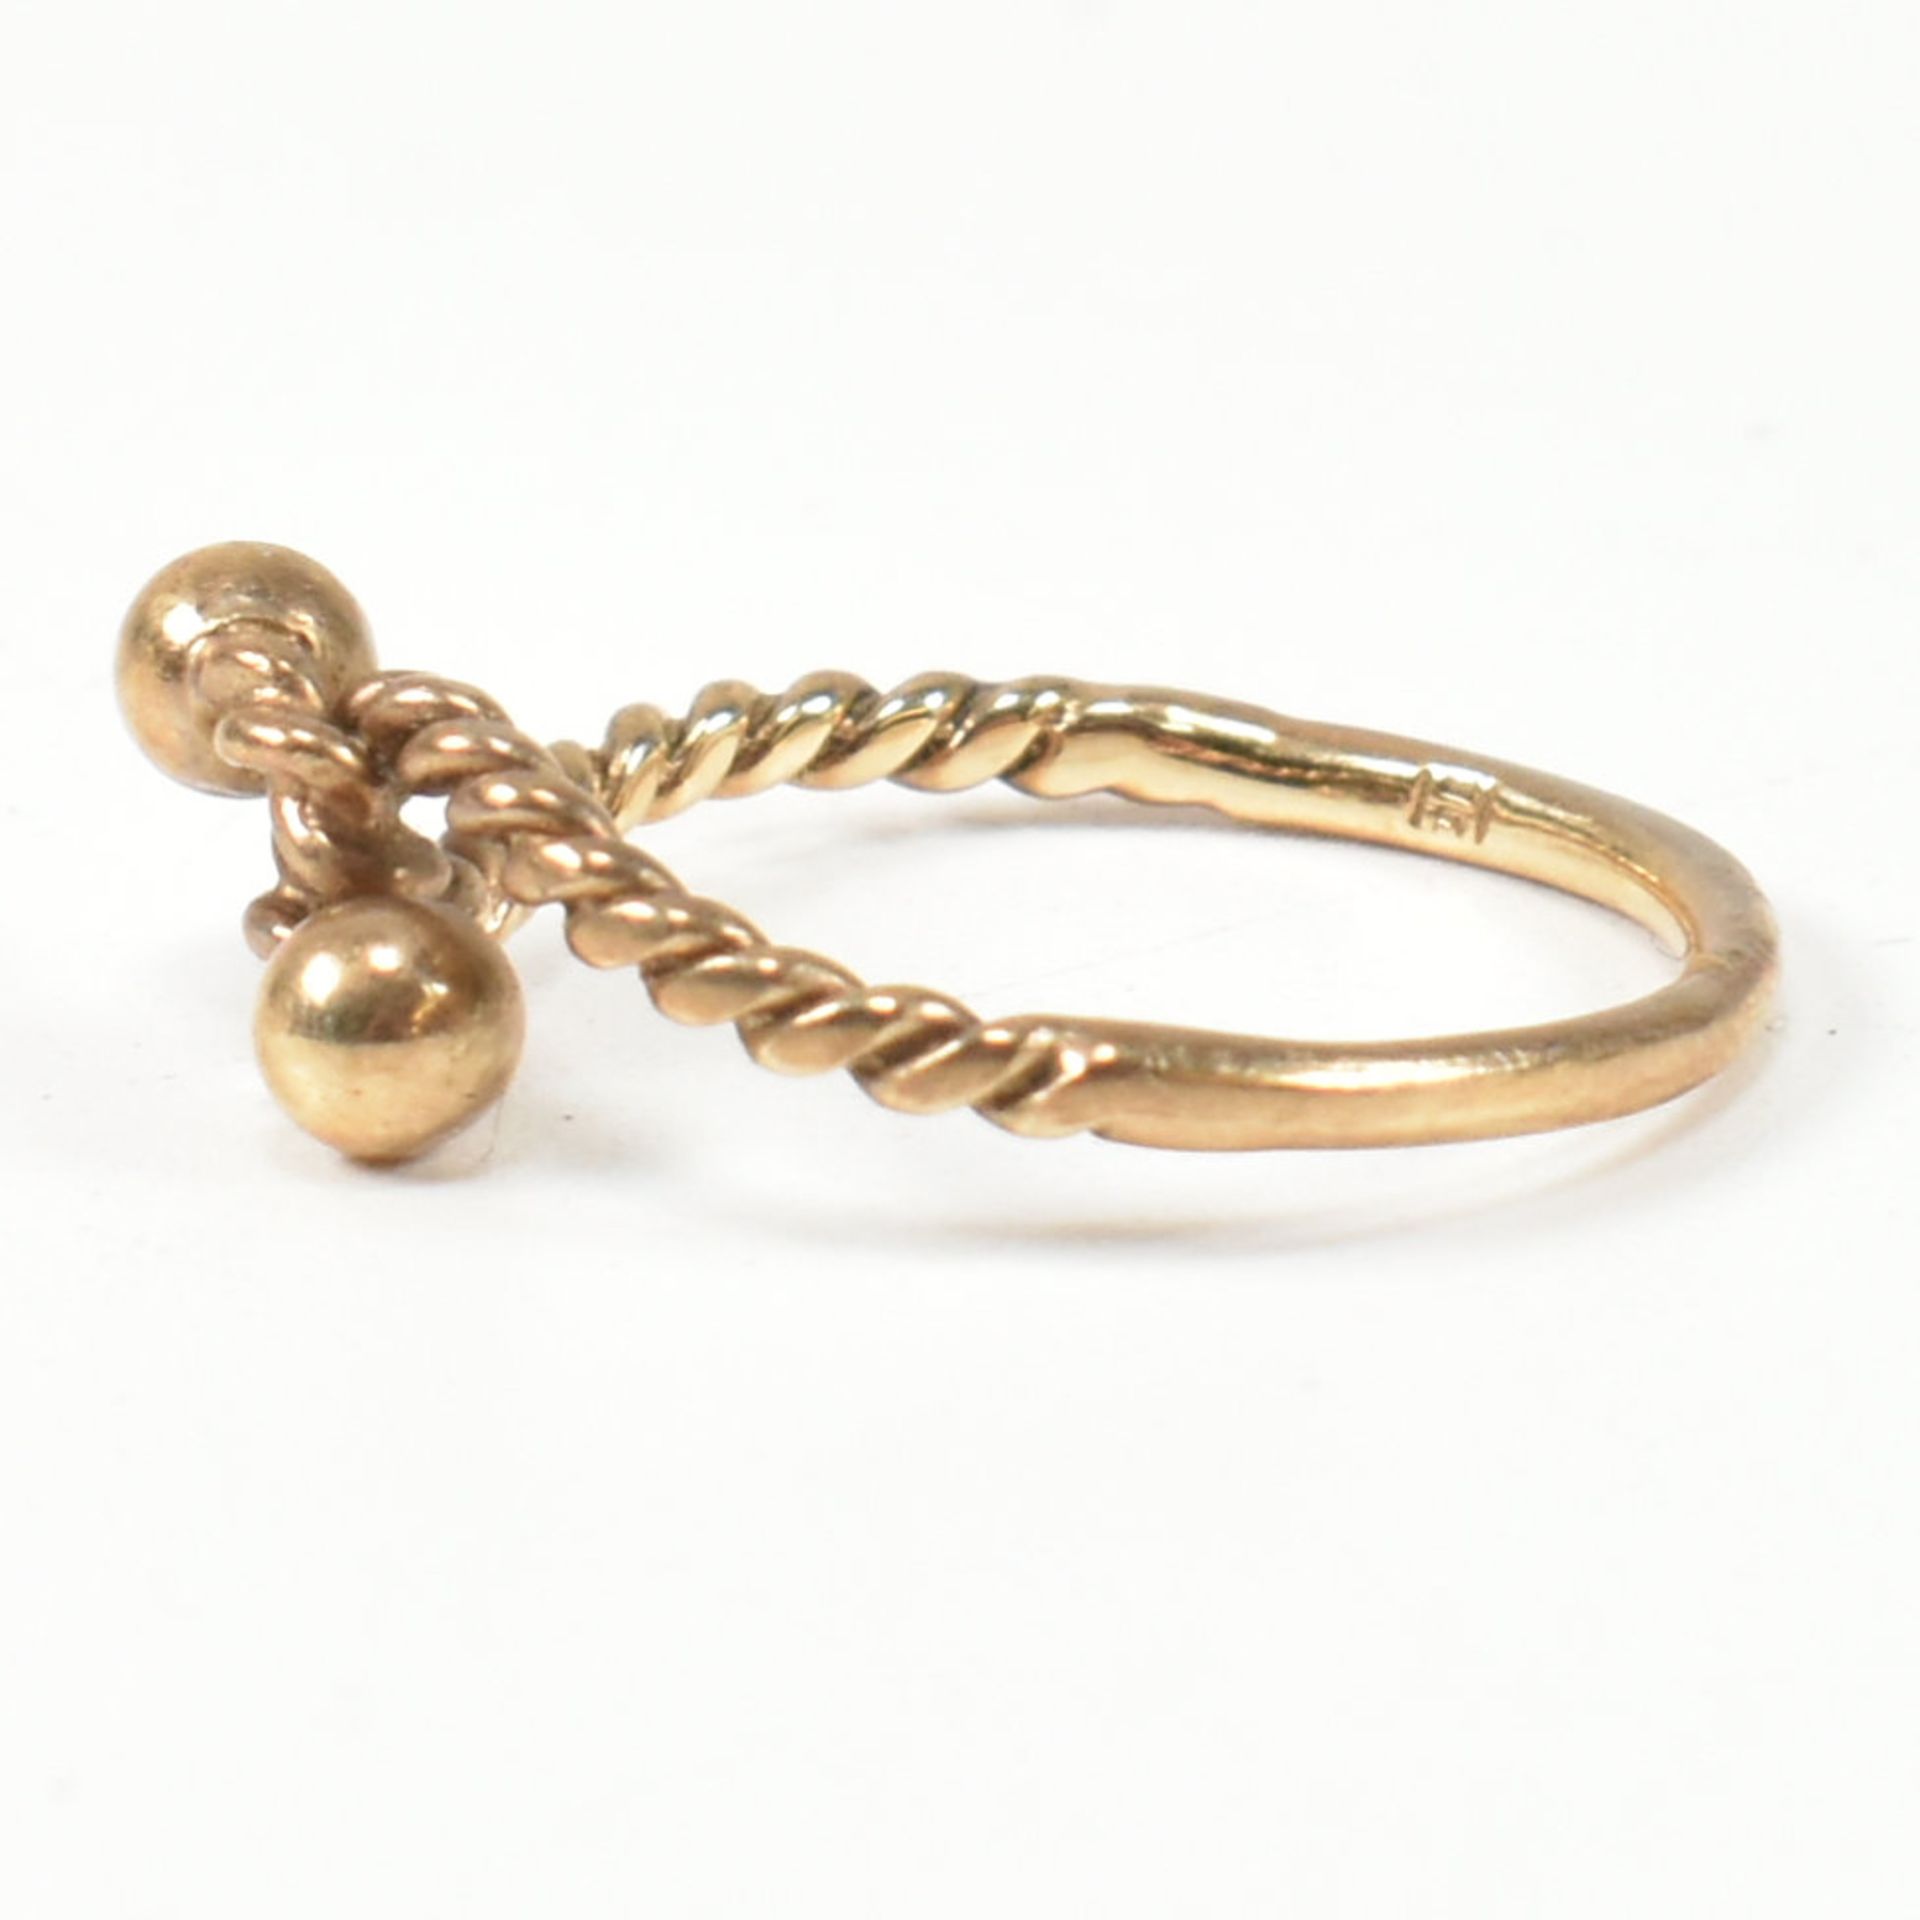 HALLMARKED 9CT GOLD ROPE TWIST RING - Image 3 of 8